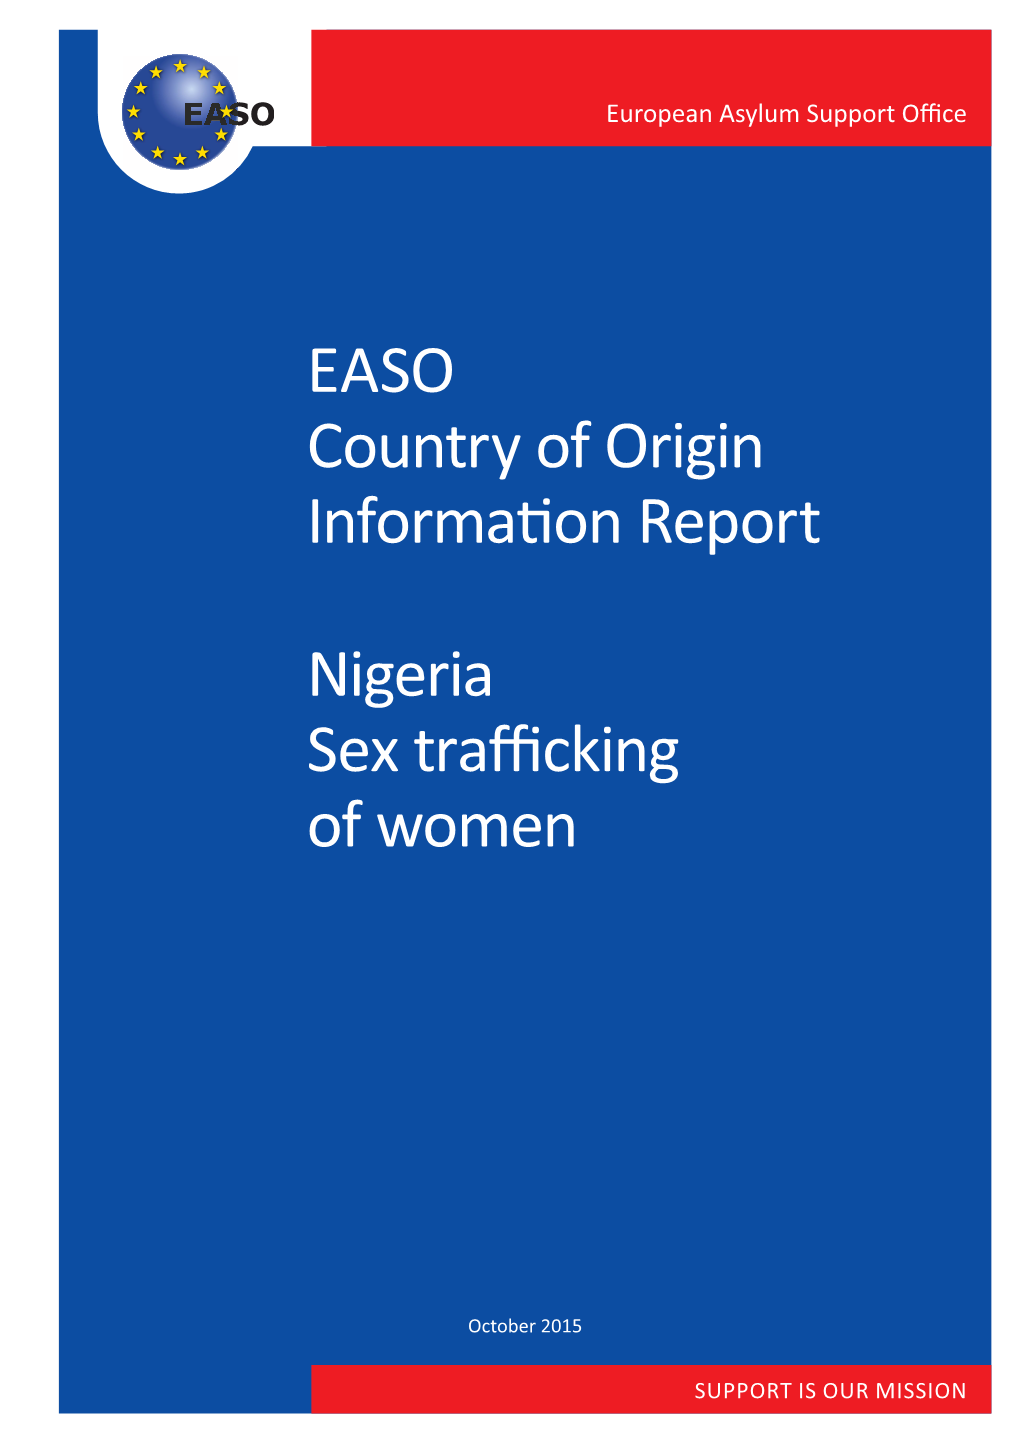 EASO's Report, Nigeria: Sex Trafficking Of